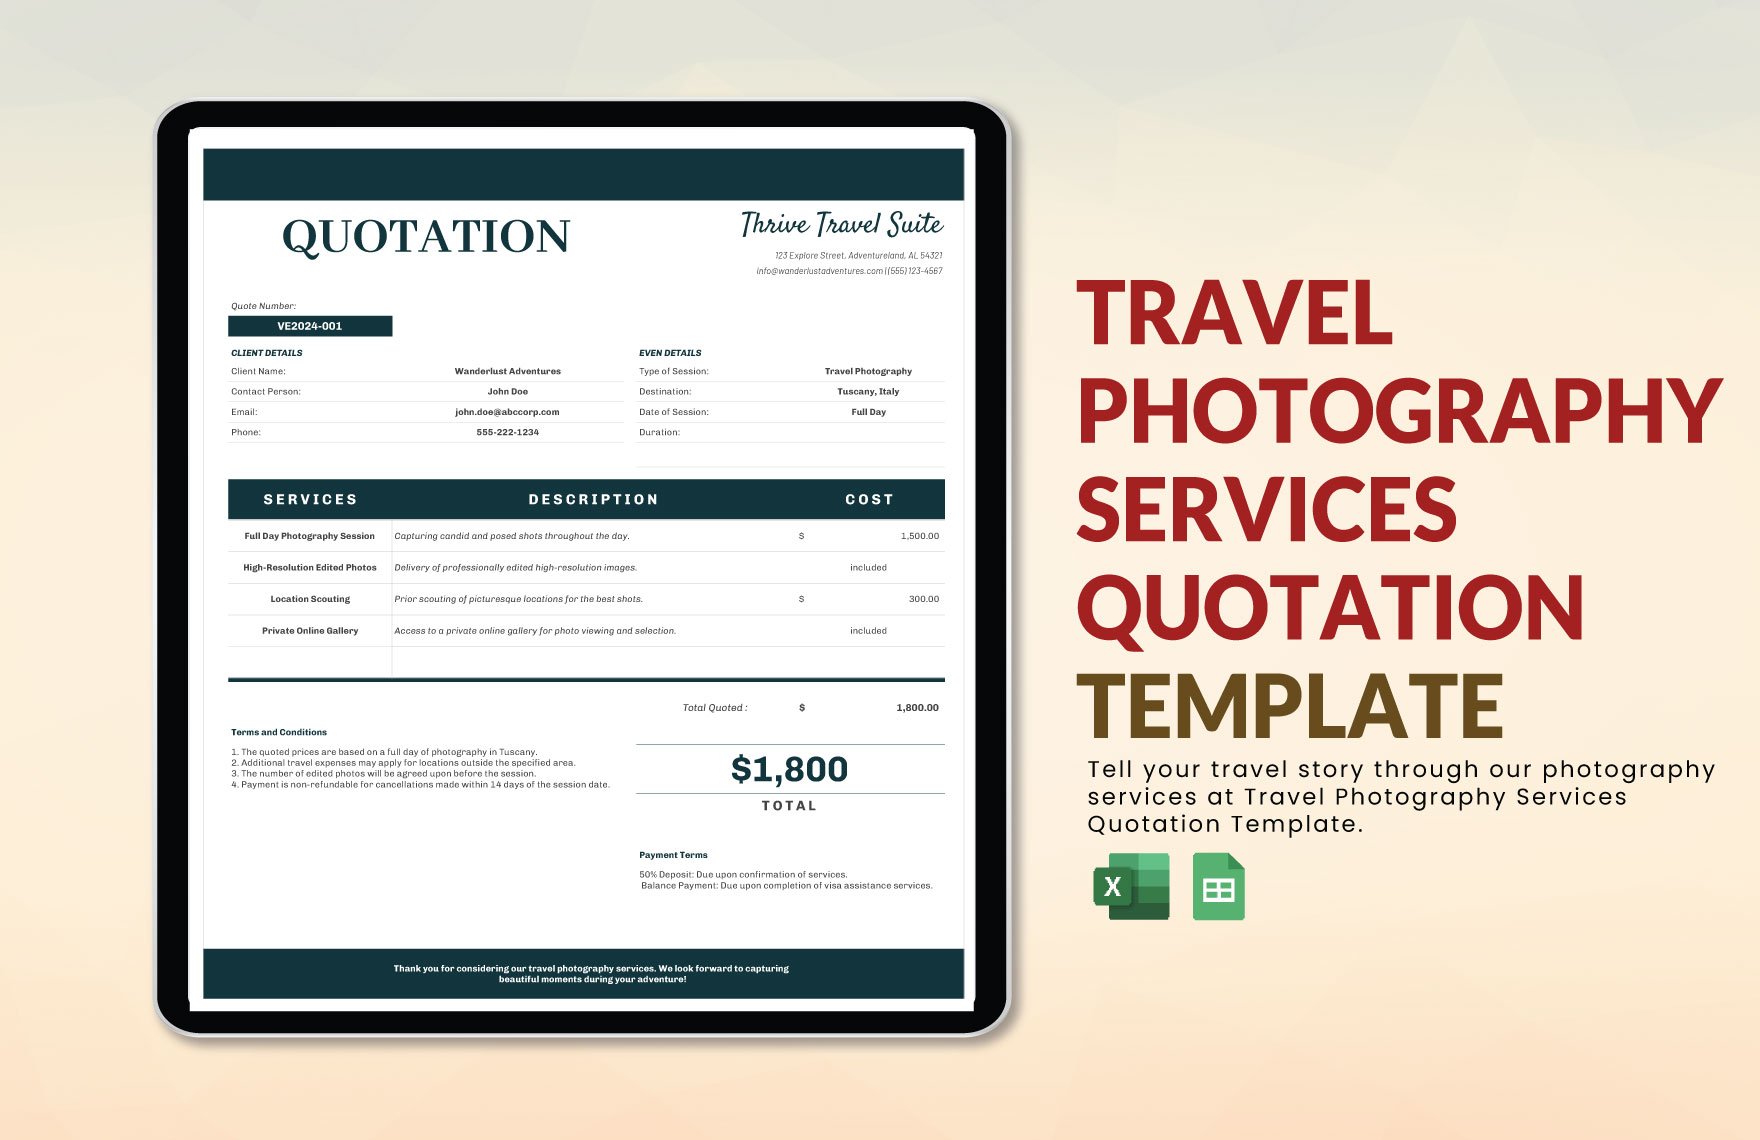 Travel Photography Services Quotation Template